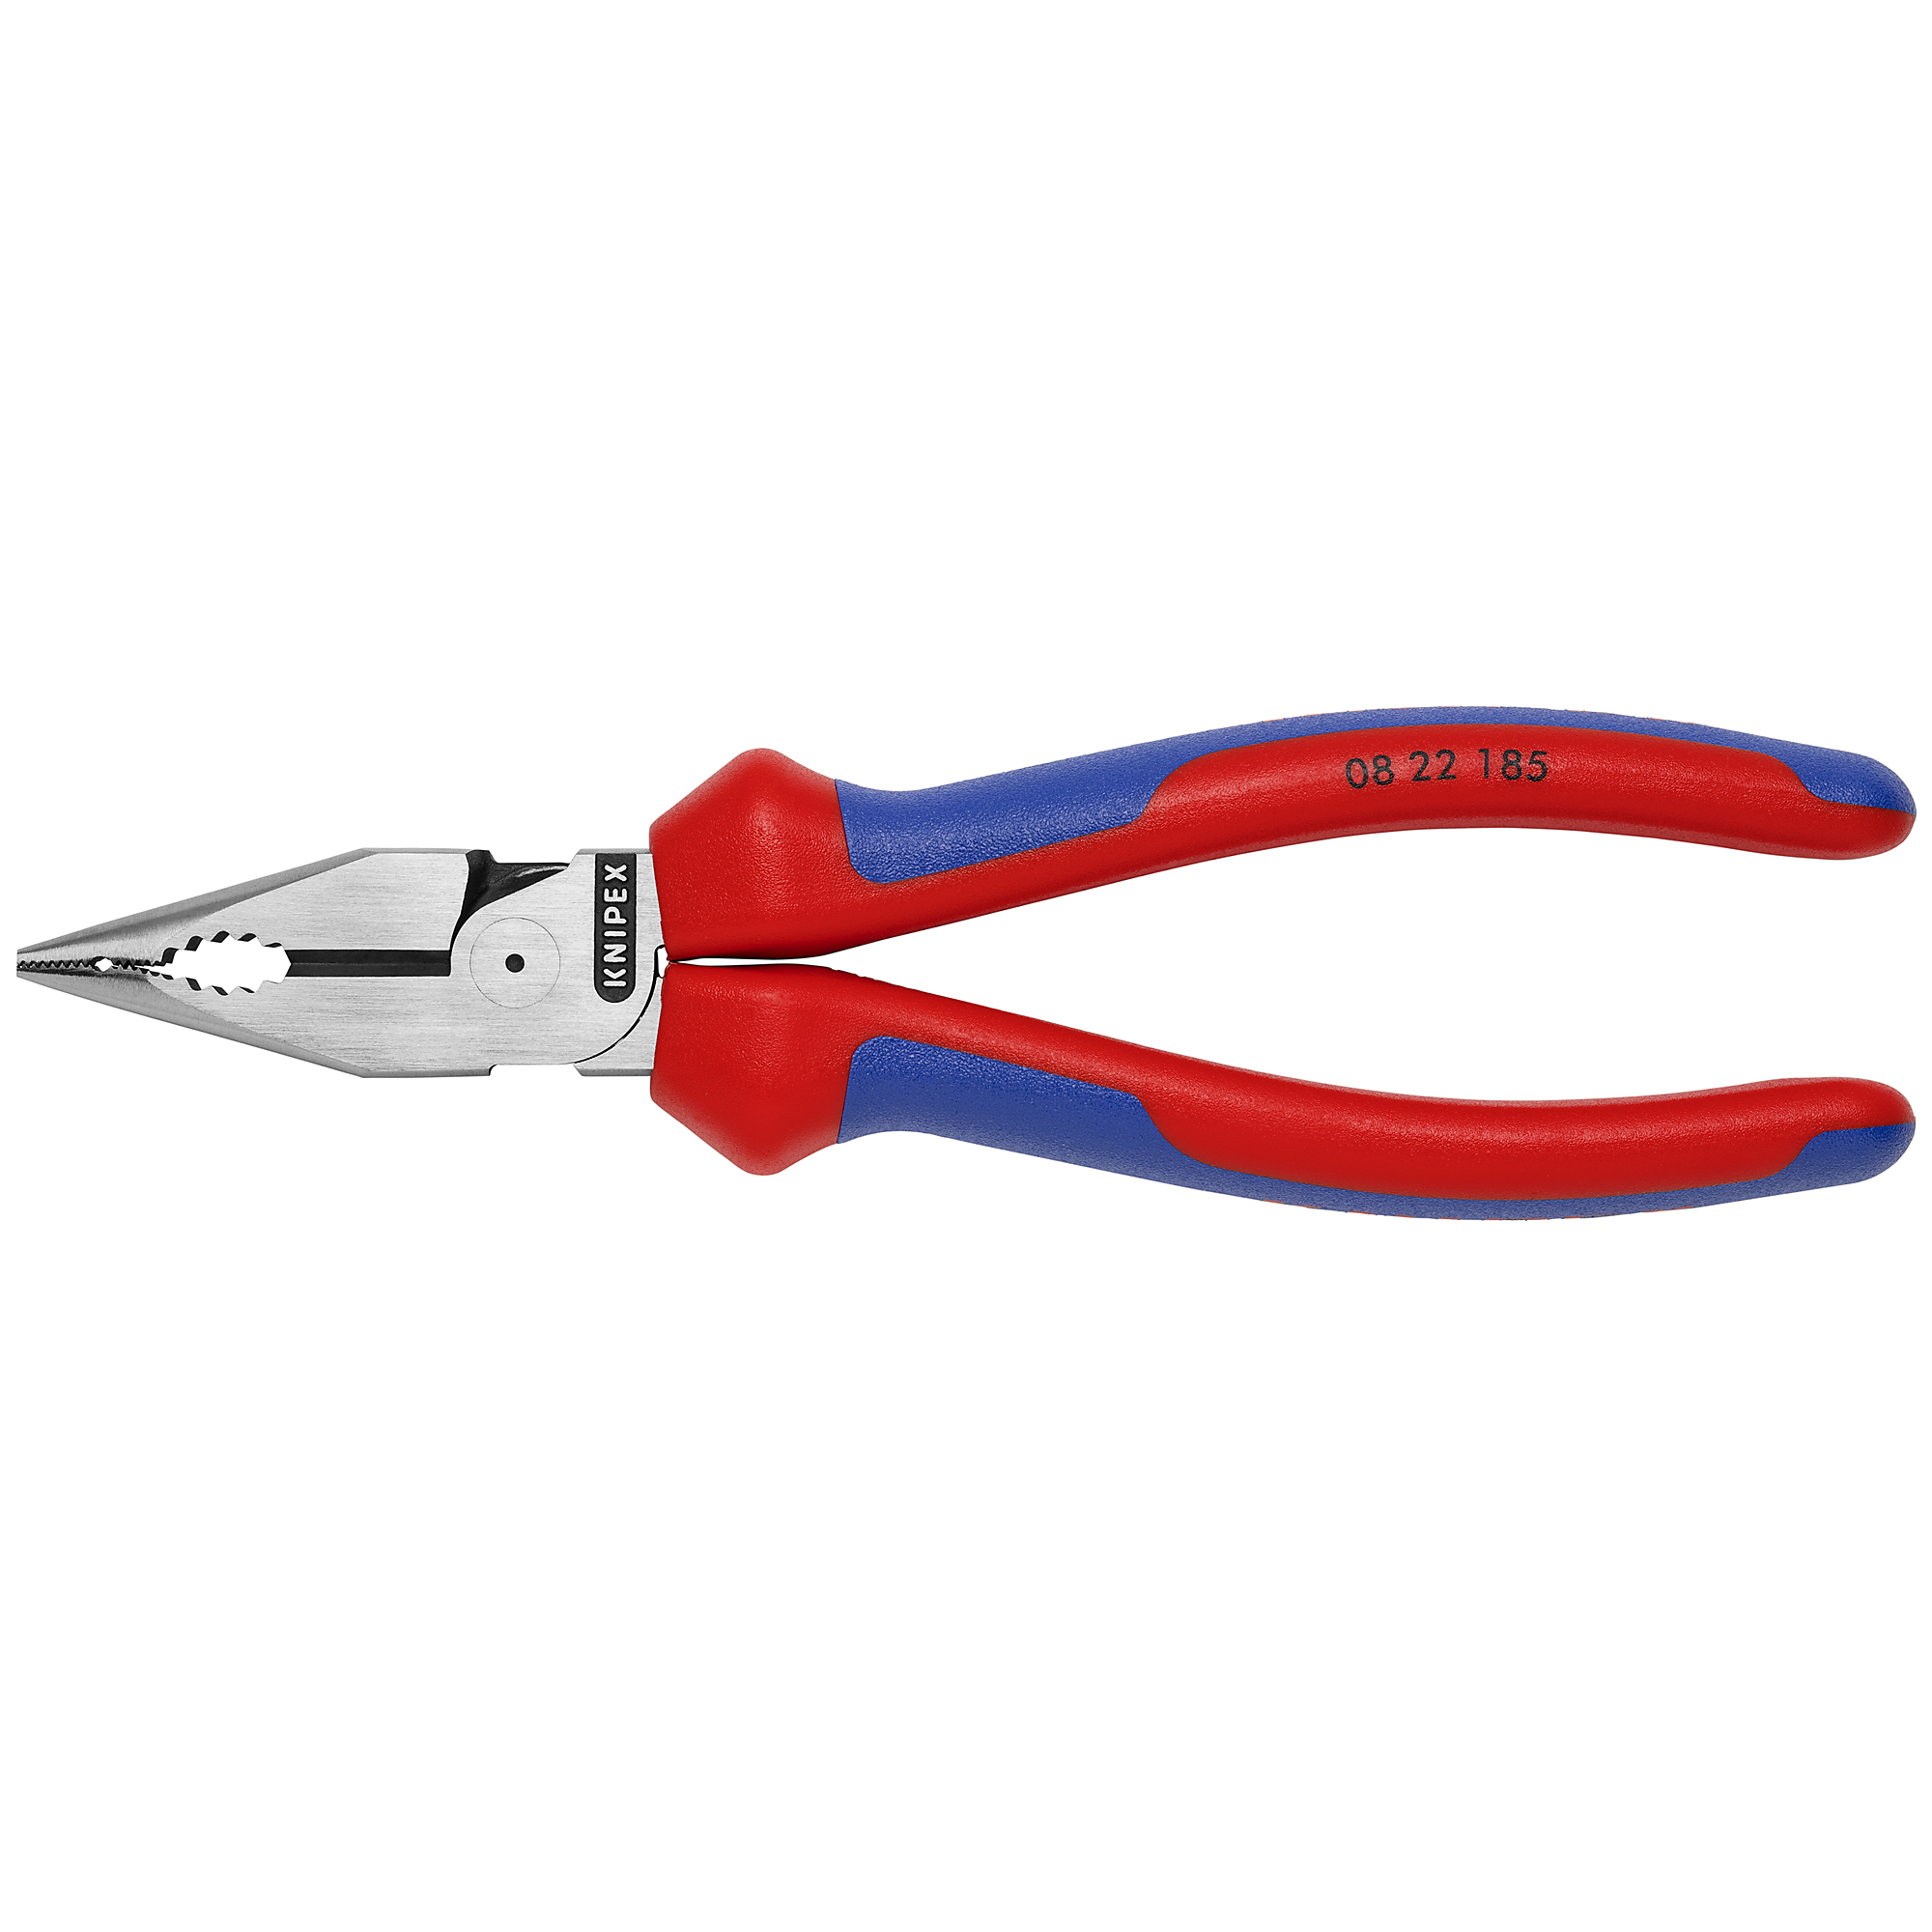 KNIPEX, Needle-Nose Combination Pliers, Comfort grip,7.5Inch, Pieces (qty.) 1 Material Steel, Jaw Capacity 0.156 in, Model 08 22 185